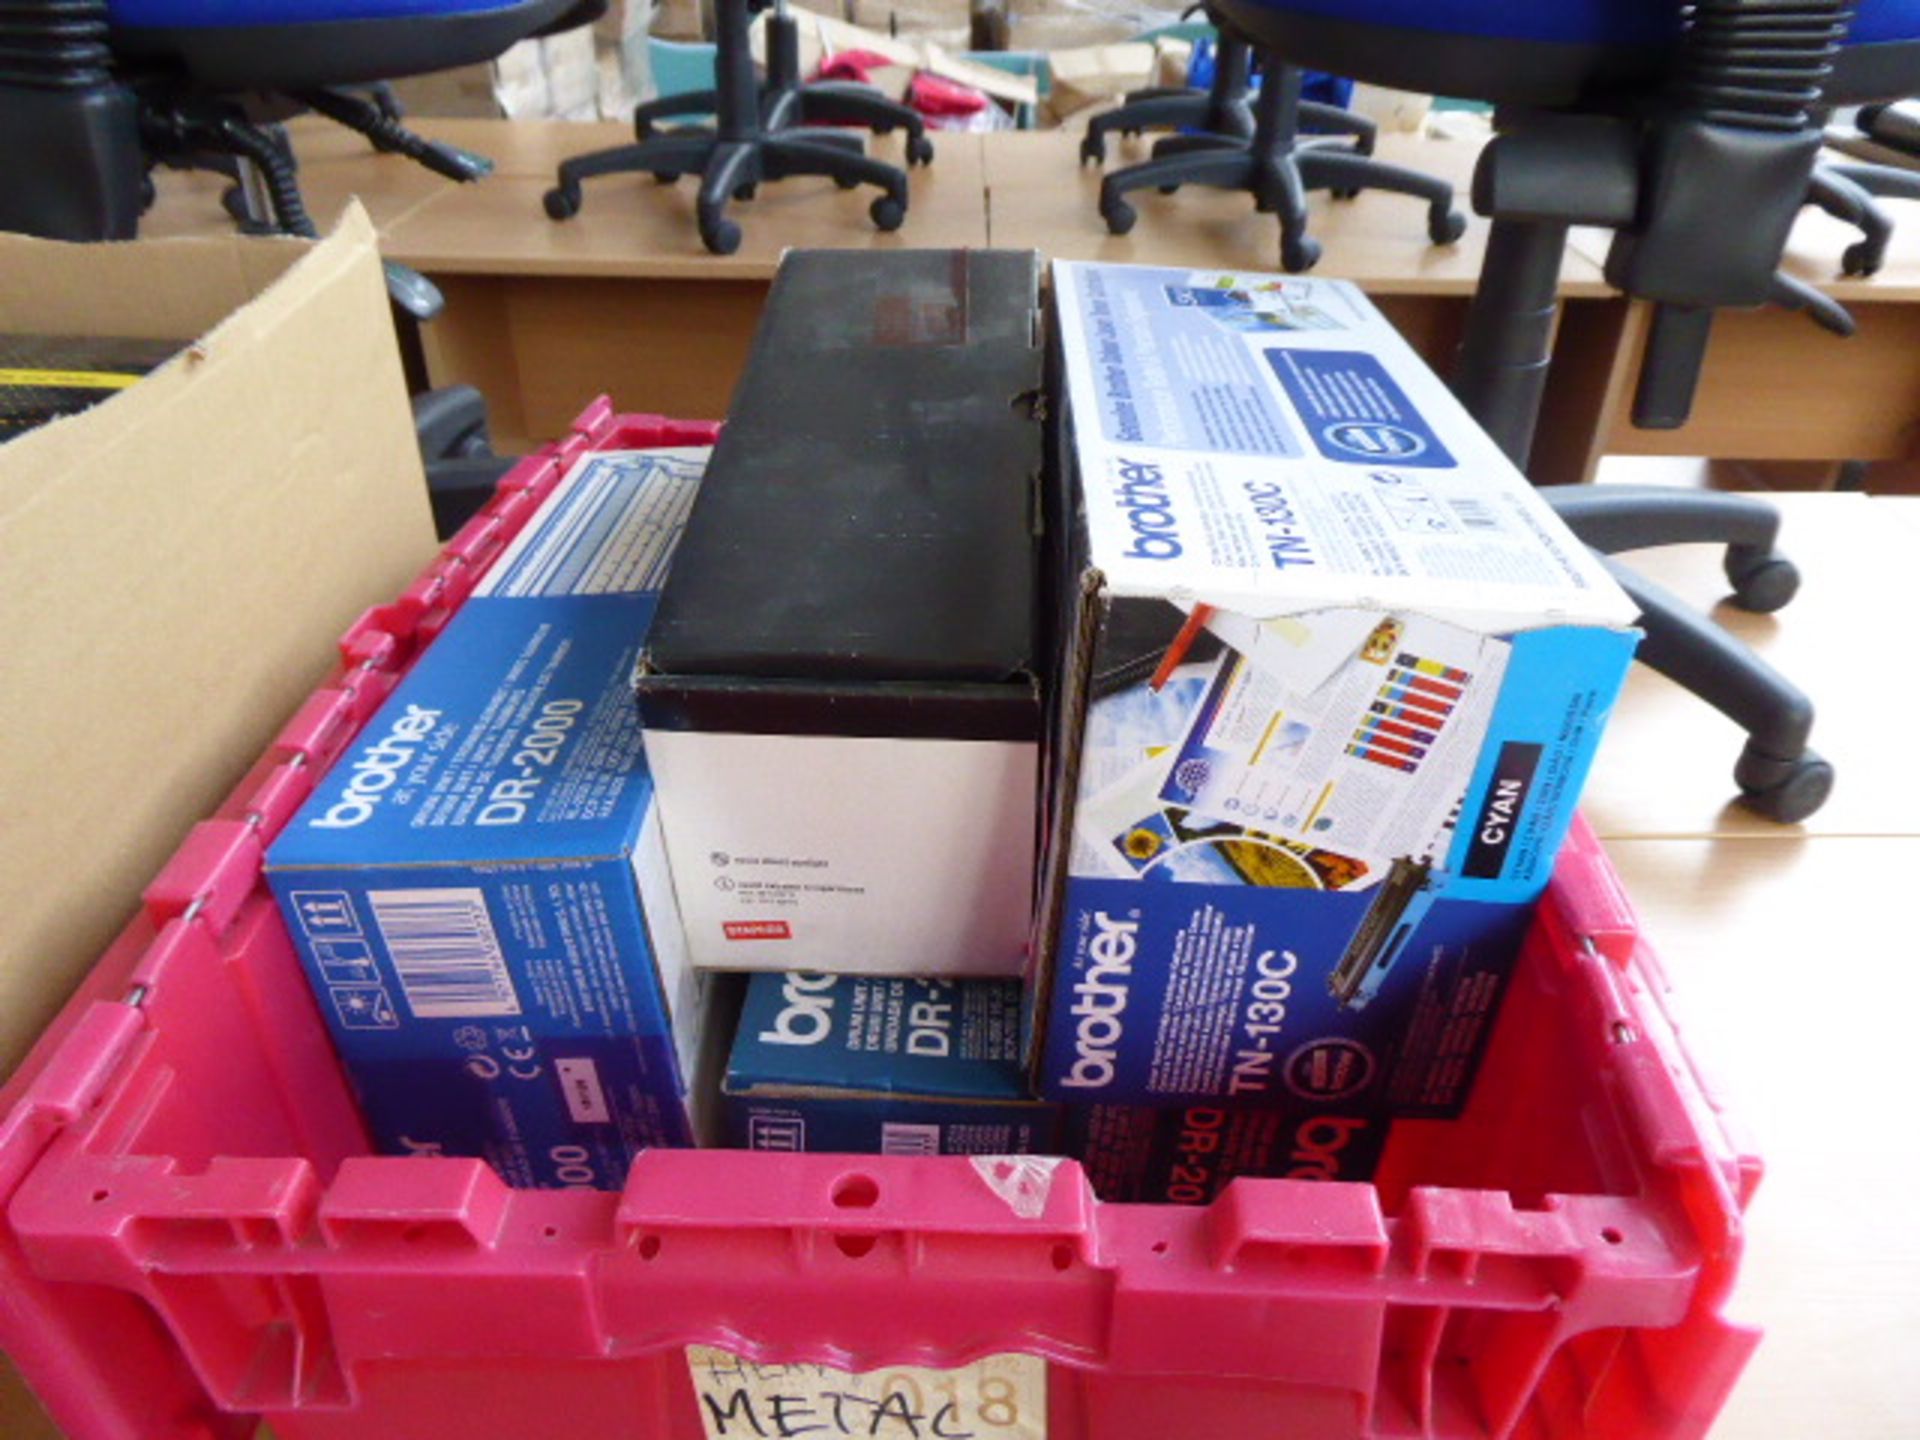 Box containing 3 Brother drum units, Brother colour toner cartridge and Staples toner